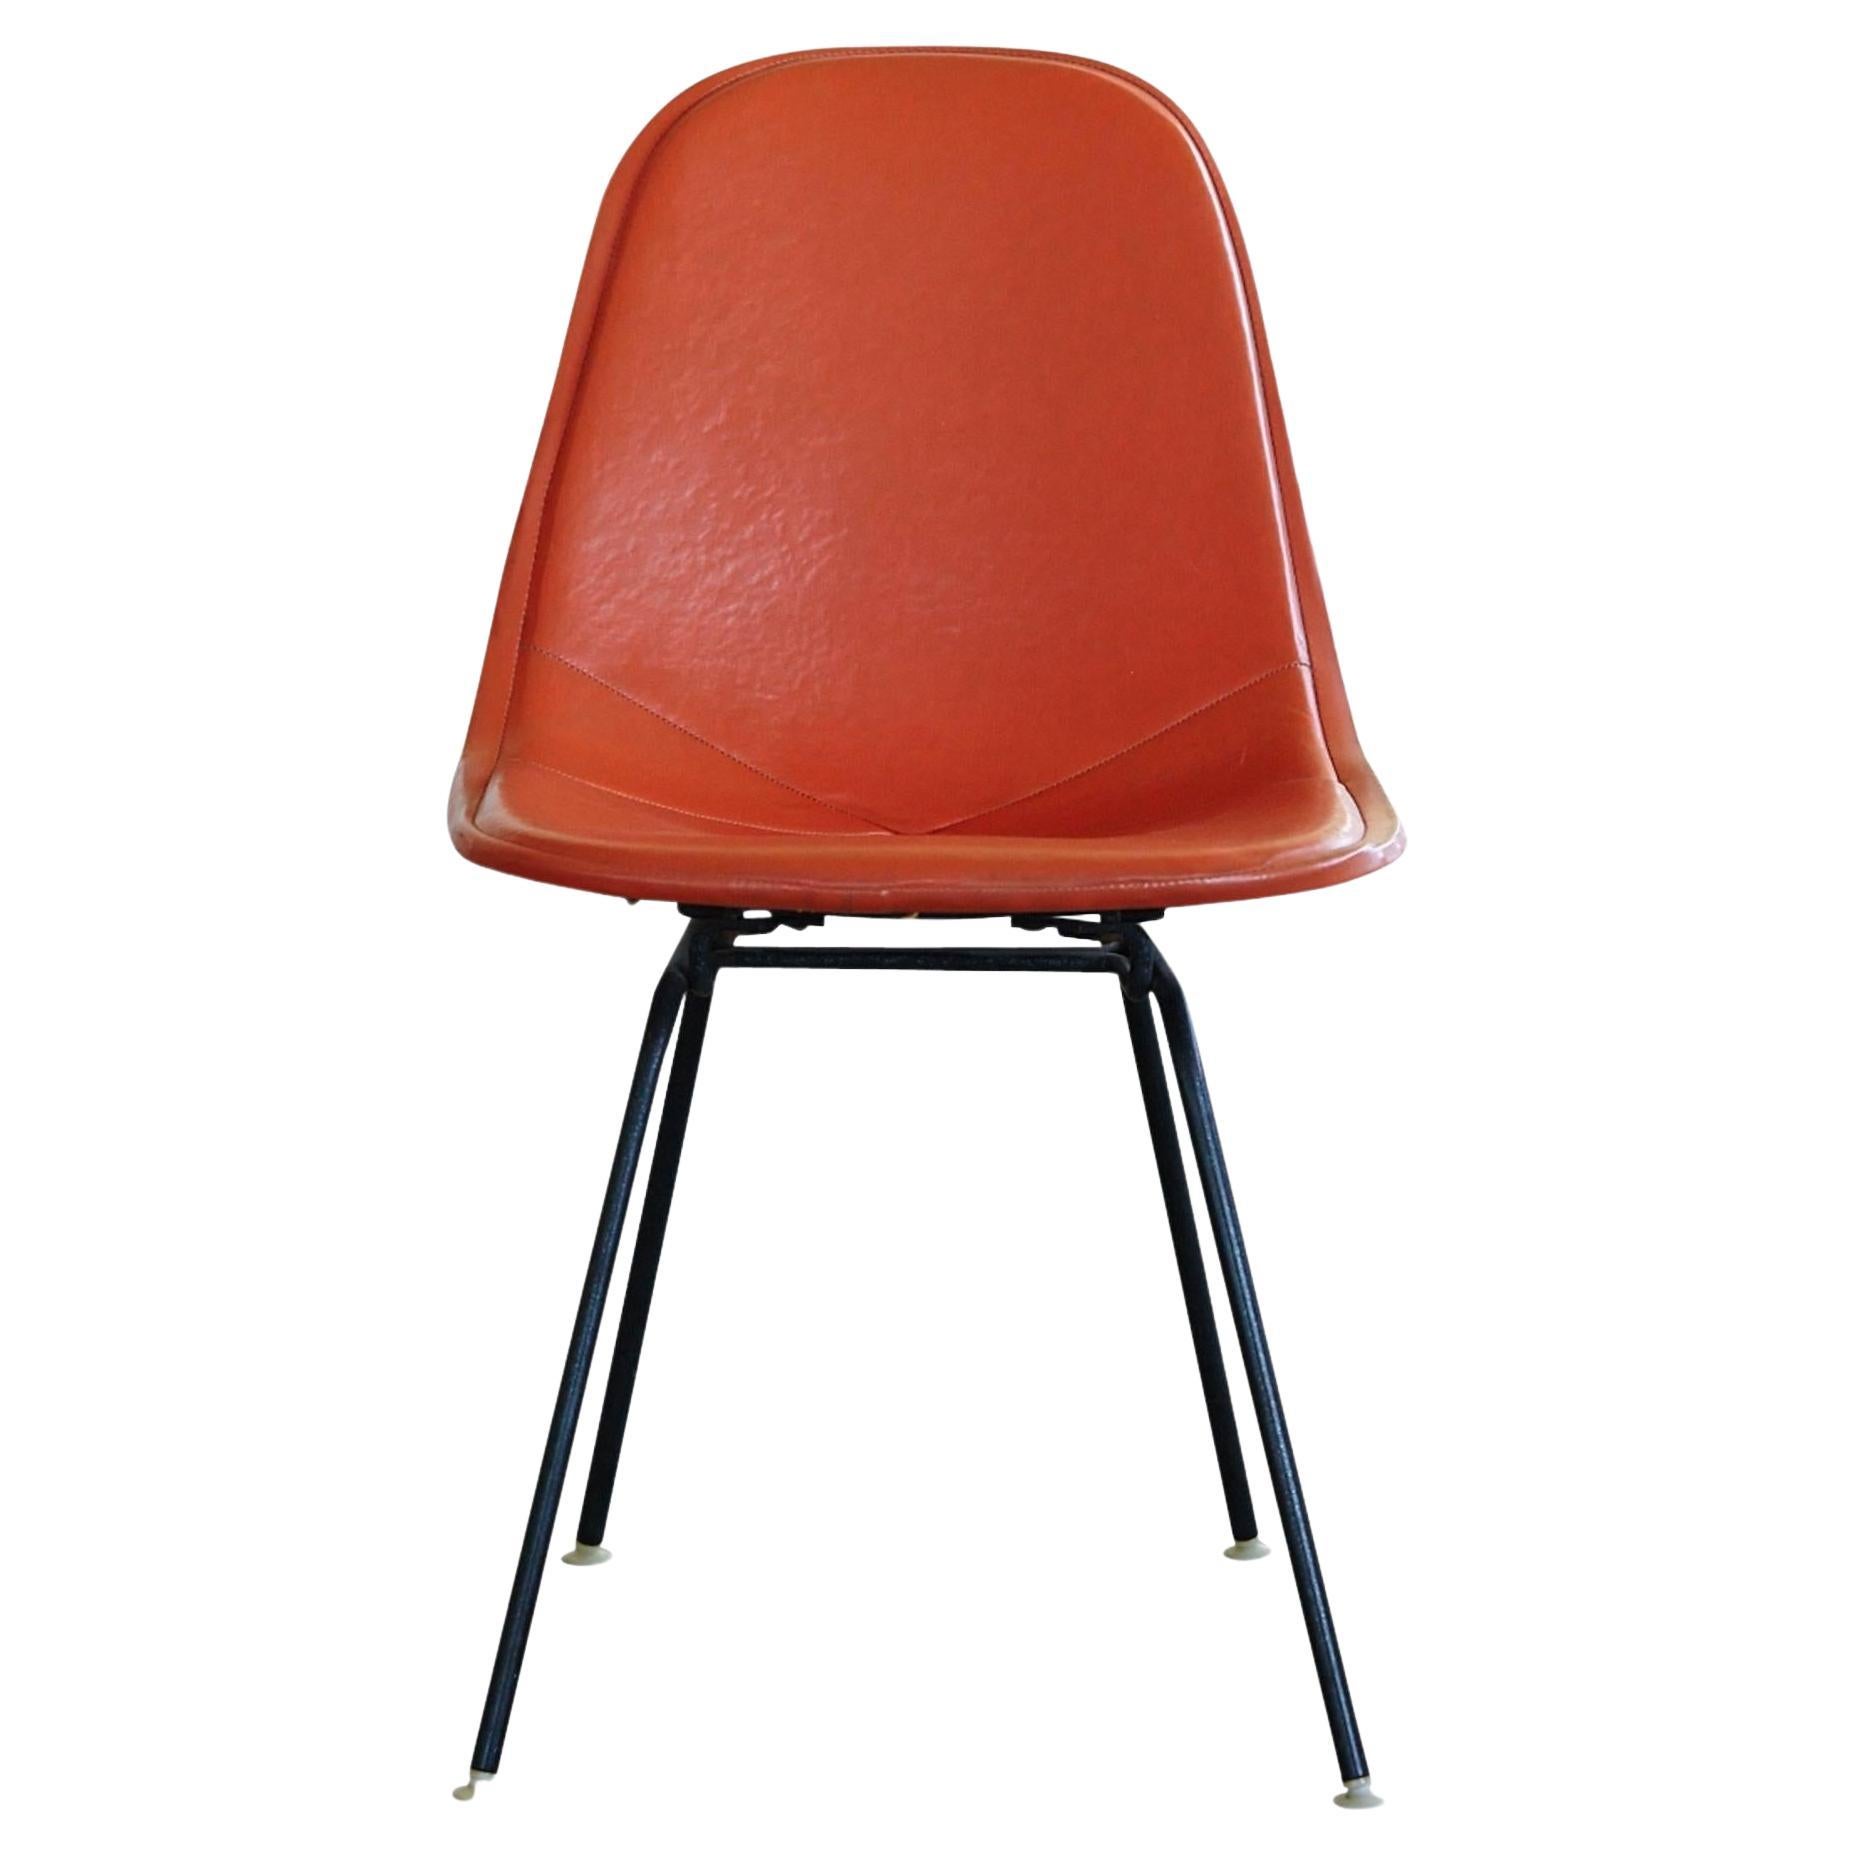 Original Eames DKX-1 Side Chair in Orange Leather for Herman Miller, 1960s For Sale